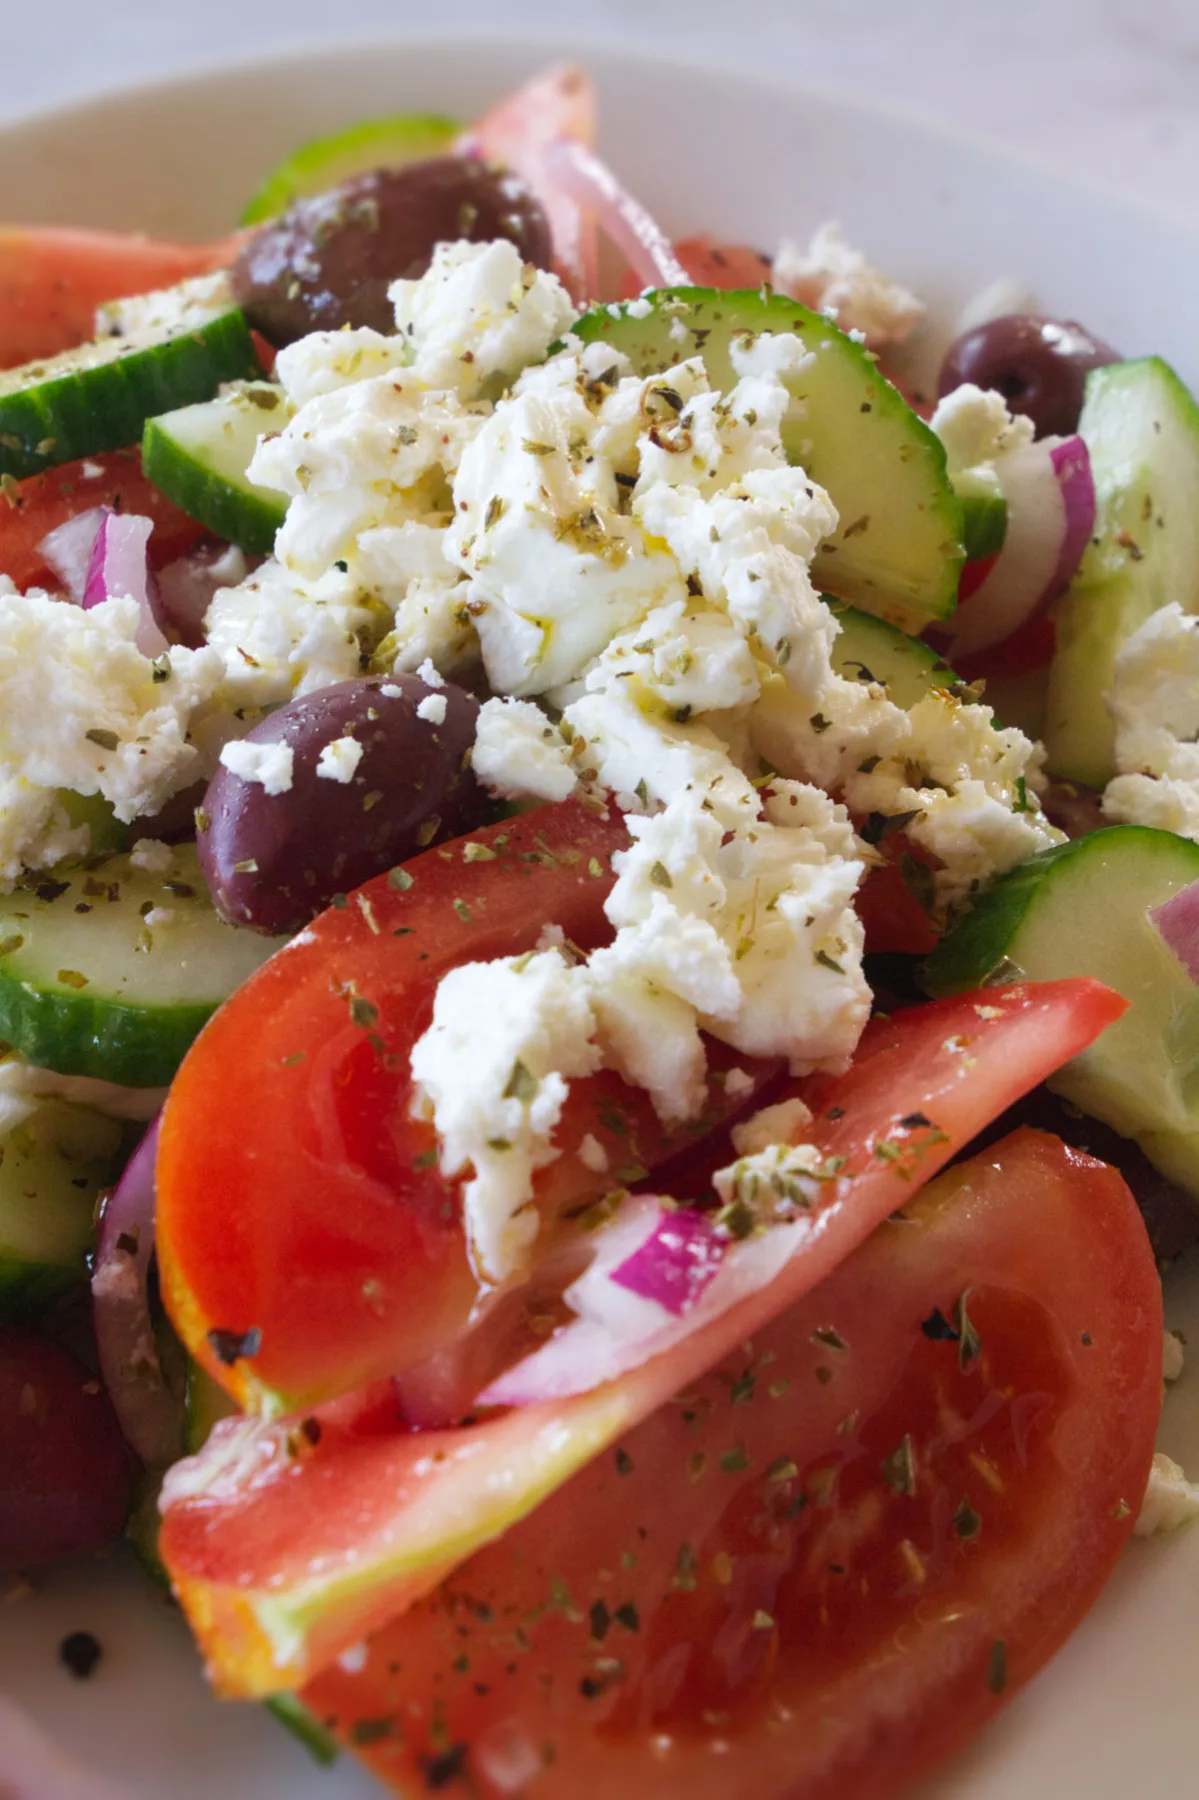 A bowl of Greek salad is garnished with some crumbled feta cheese.